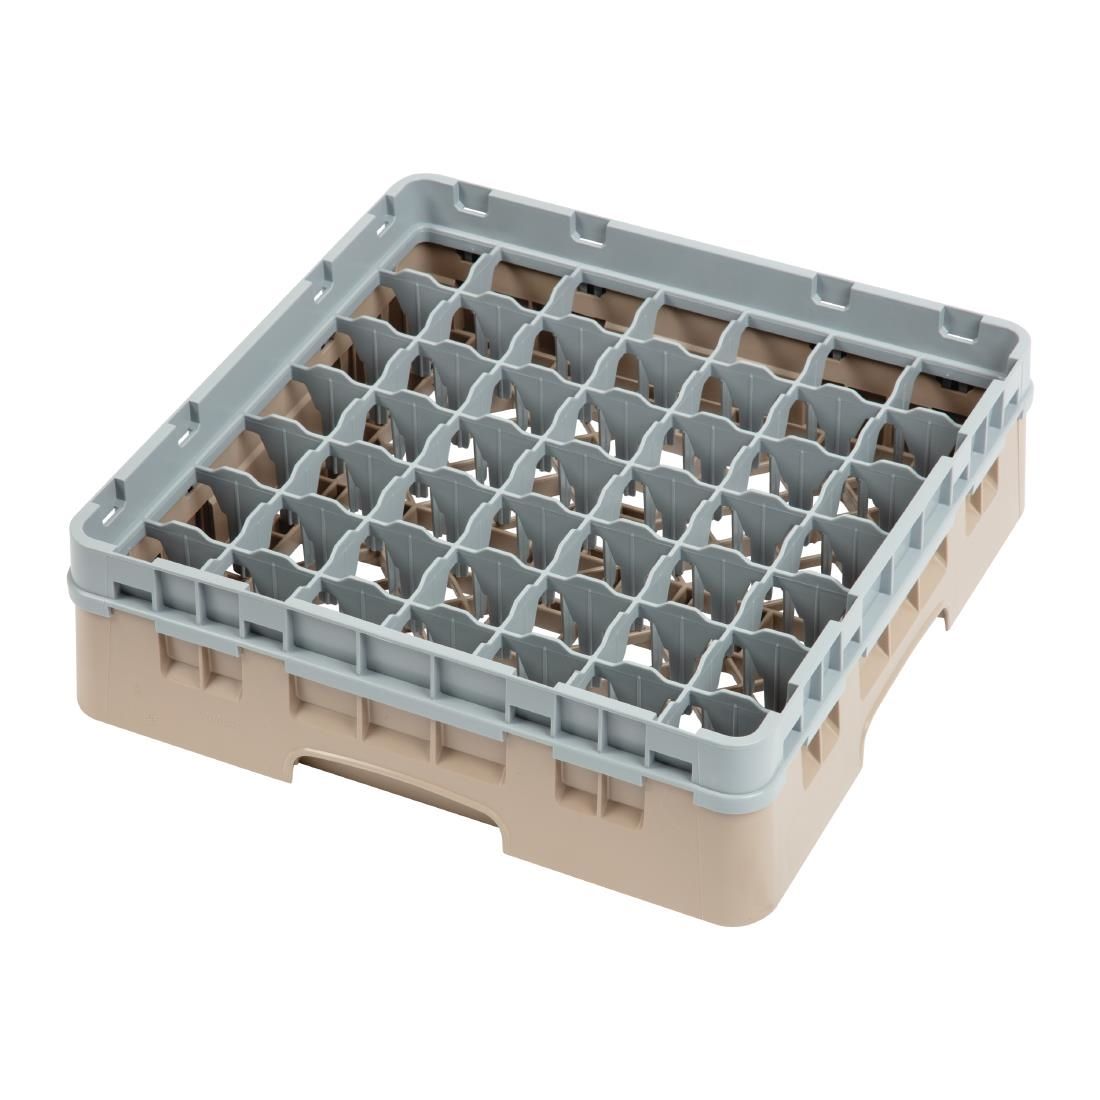 Cambro Camrack Beige 49 Compartments Max Glass Height 92mm JD Catering Equipment Solutions Ltd